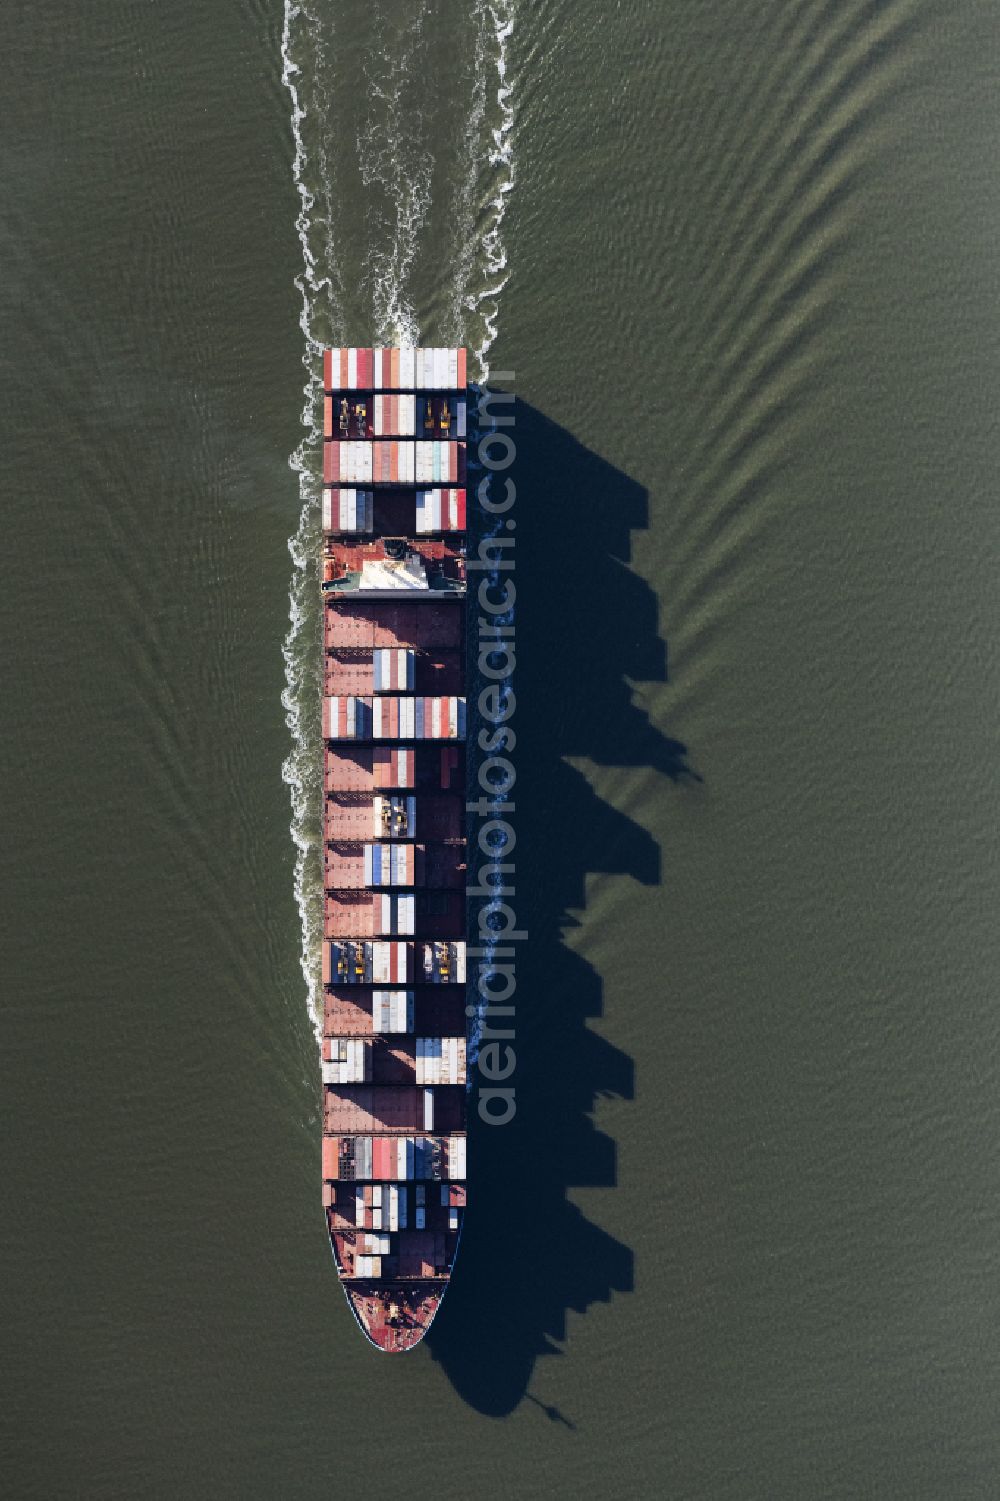 Vertical aerial photograph Bremerhaven - Vertical aerial view from the satellite perspective of the container ship on the Outer Weser in the Wadden Sea in Wurster North Sea Coast in the state Lower Saxony, Germany